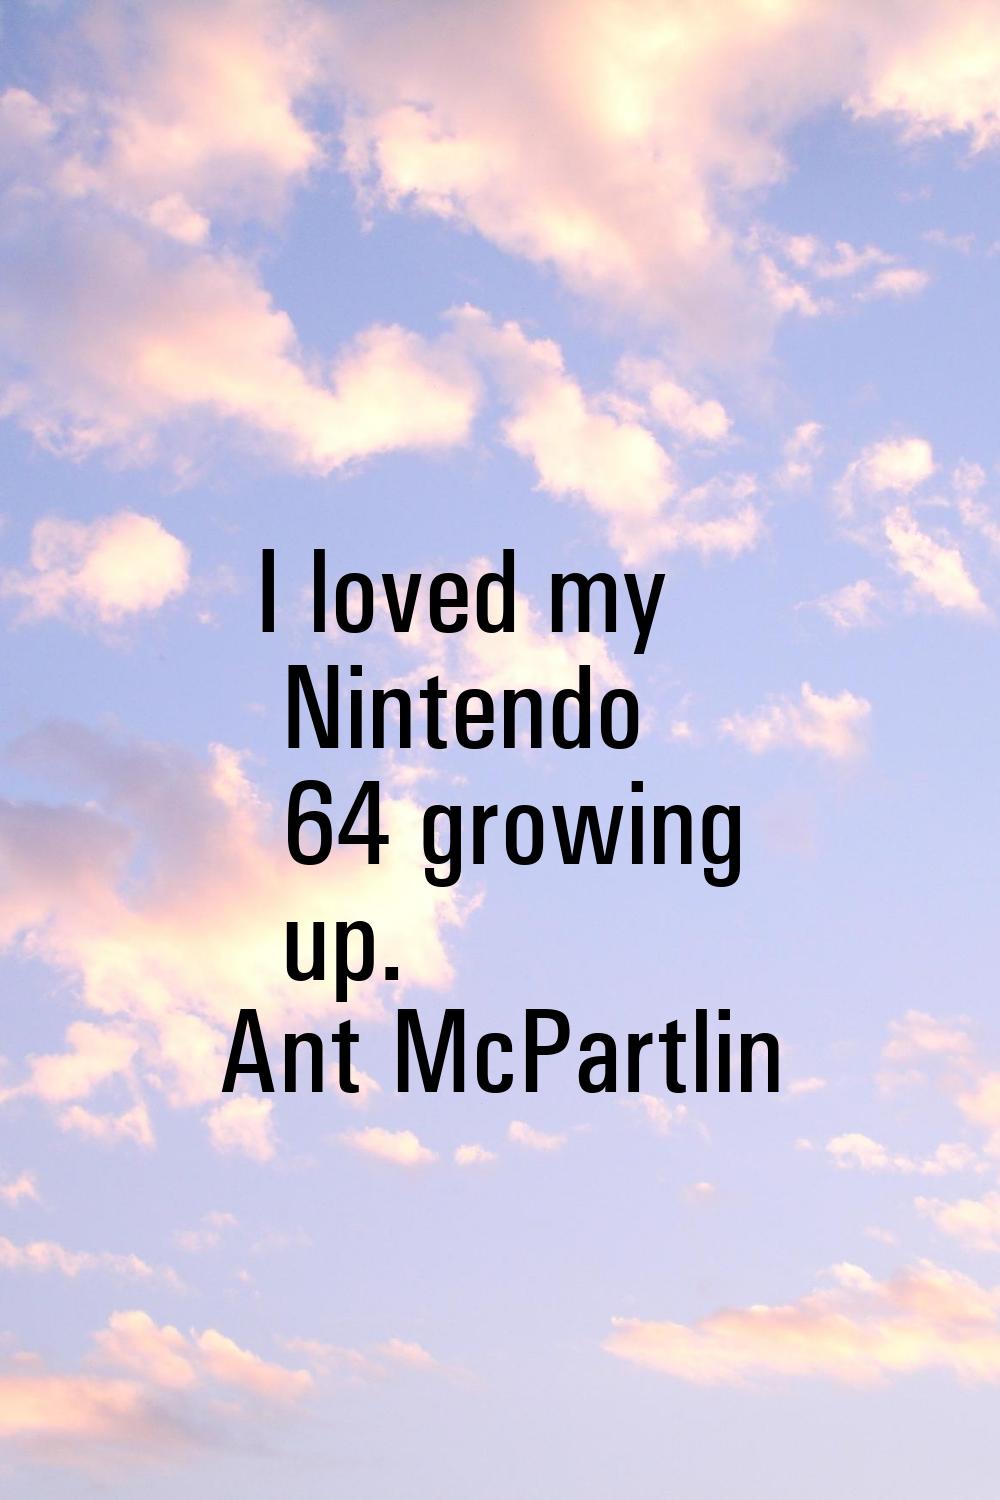 I loved my Nintendo 64 growing up.